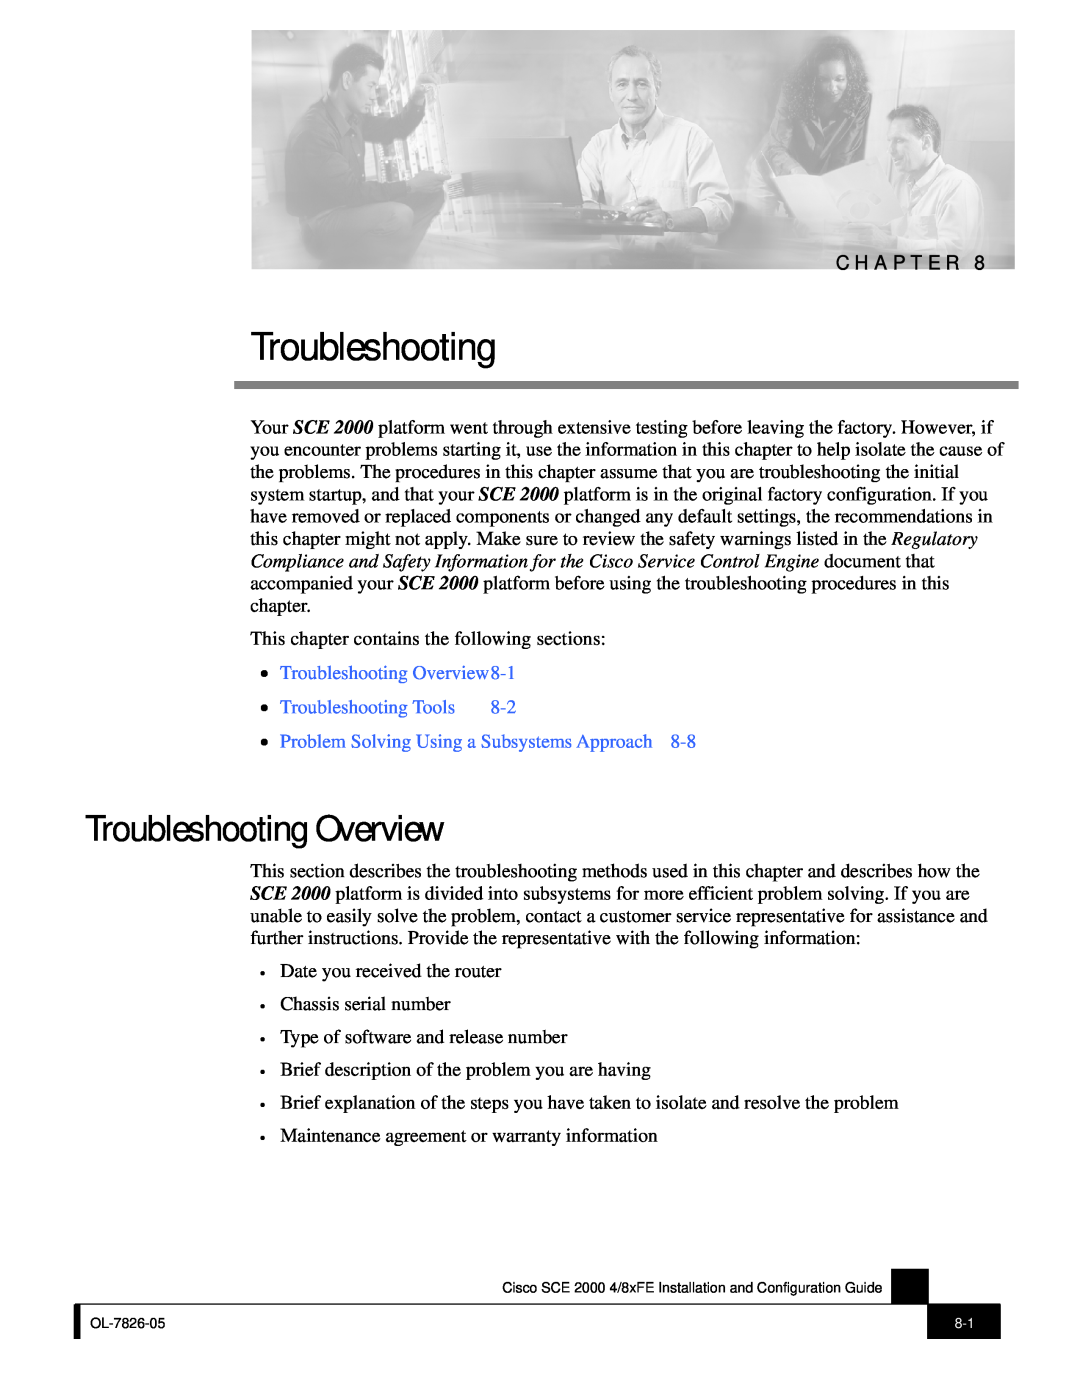 Cisco Systems SCE 2000 4/8xFE manual Troubleshooting Overview8-1, Troubleshooting Tools, C H A P T E R 